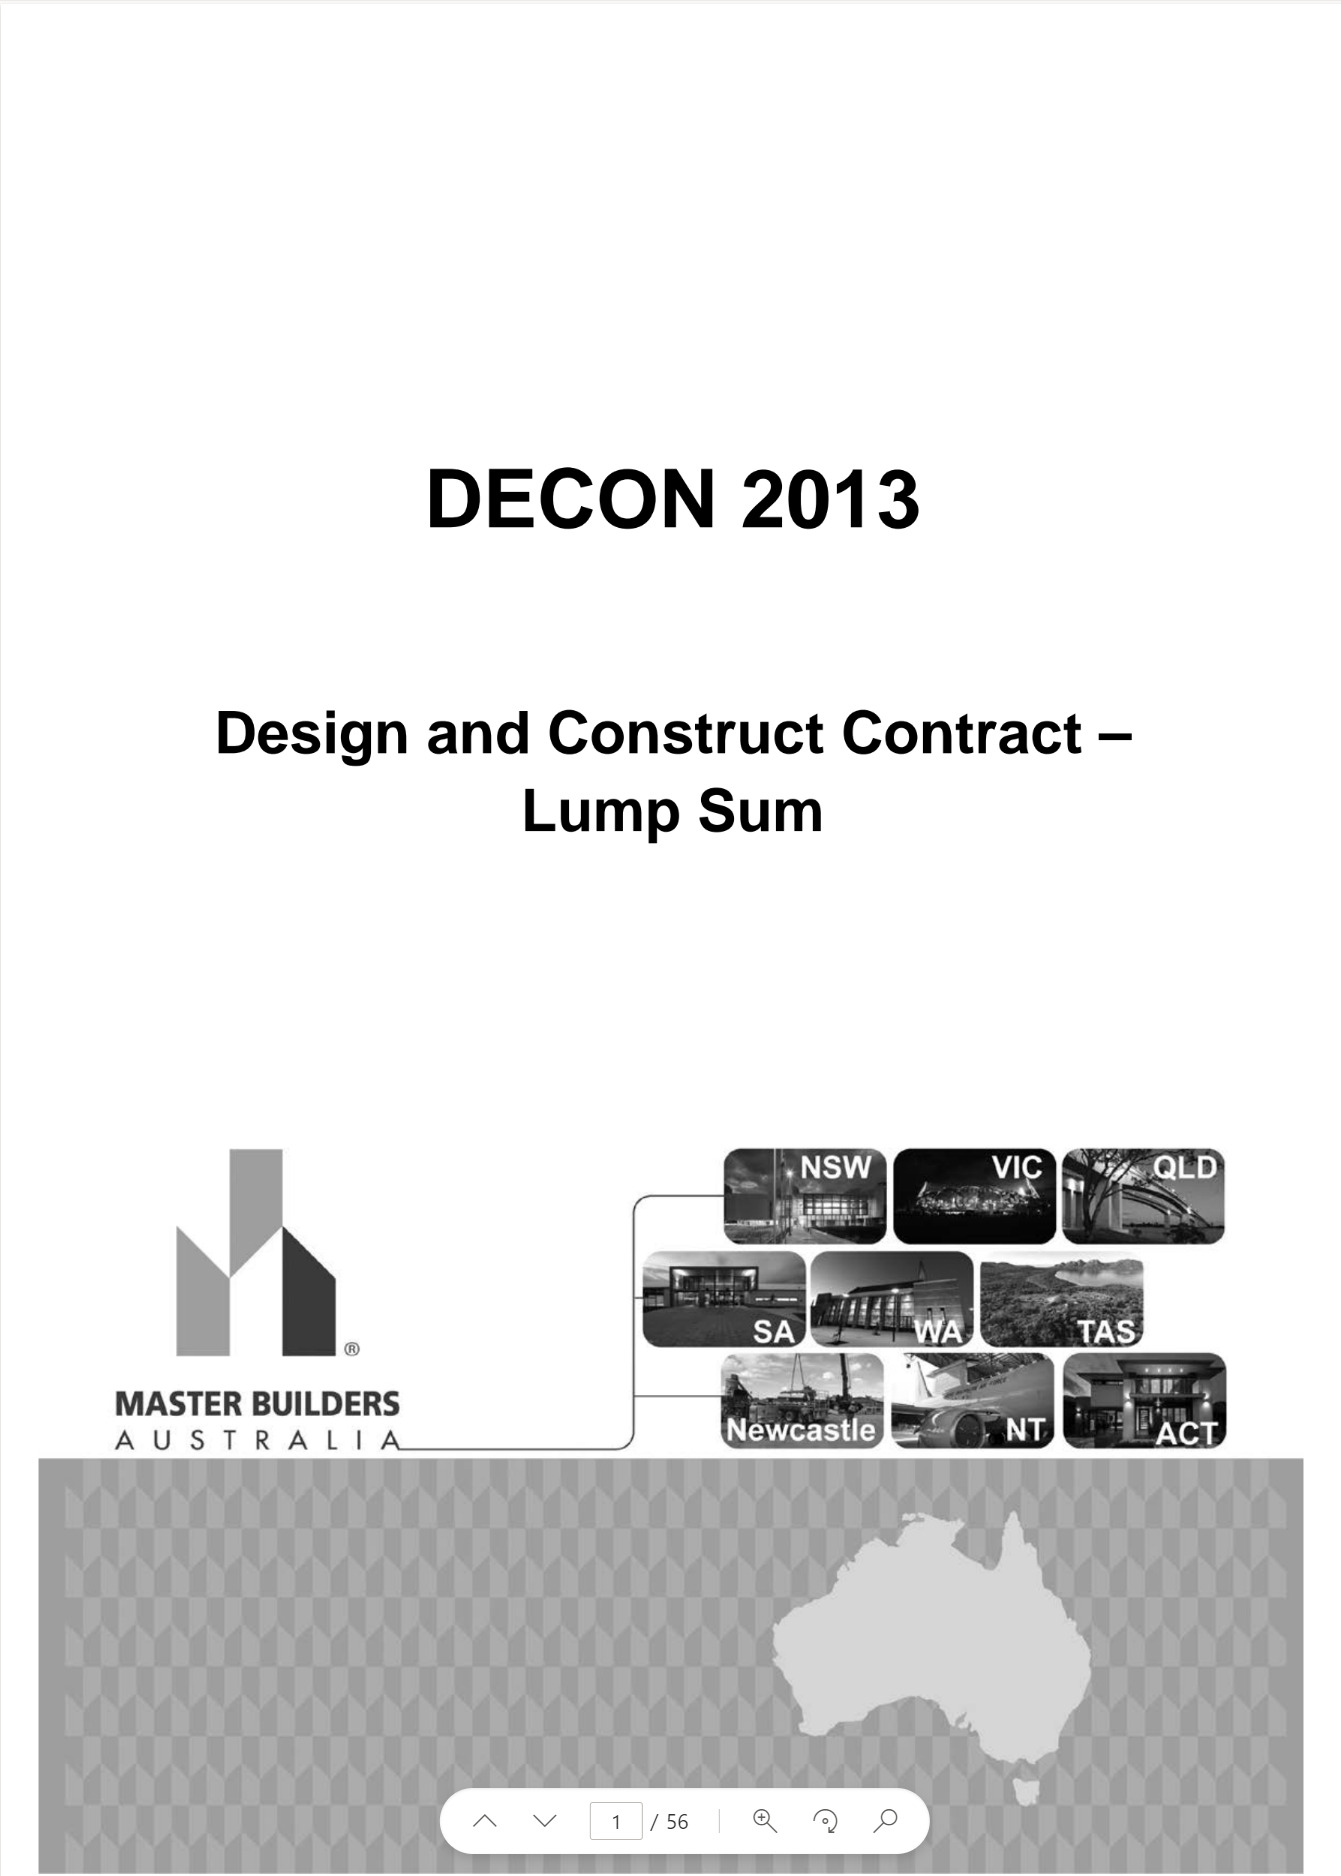 Design and Construction Lump Sum Contract 2013